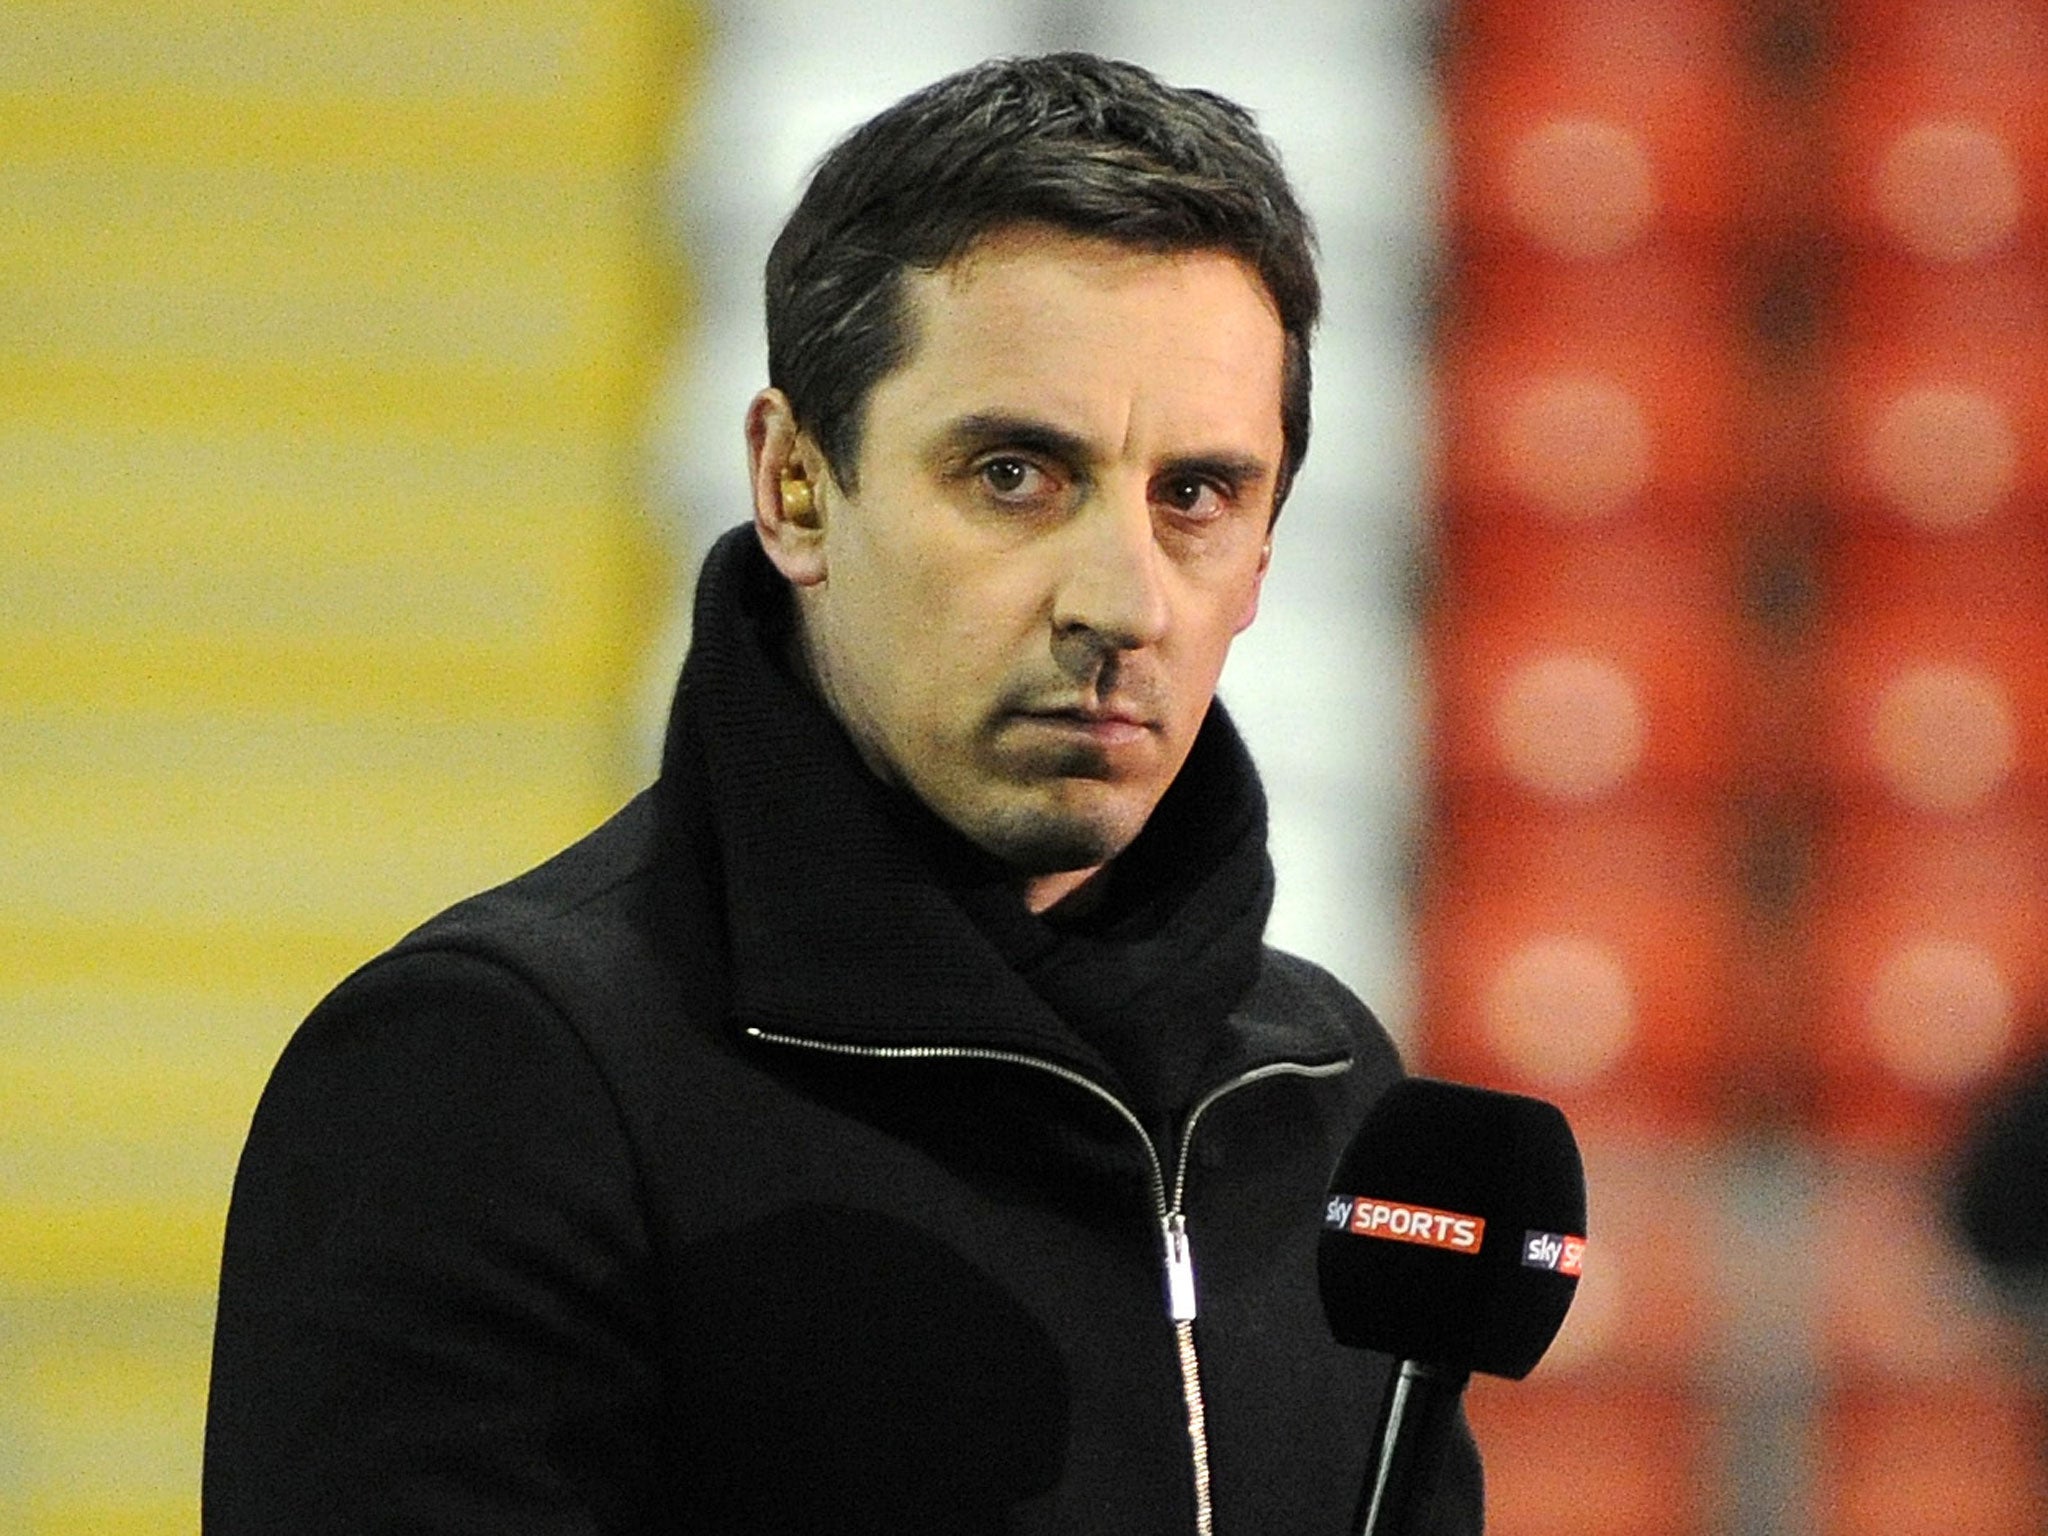 Gary Neville spend 19 years at Manchester United